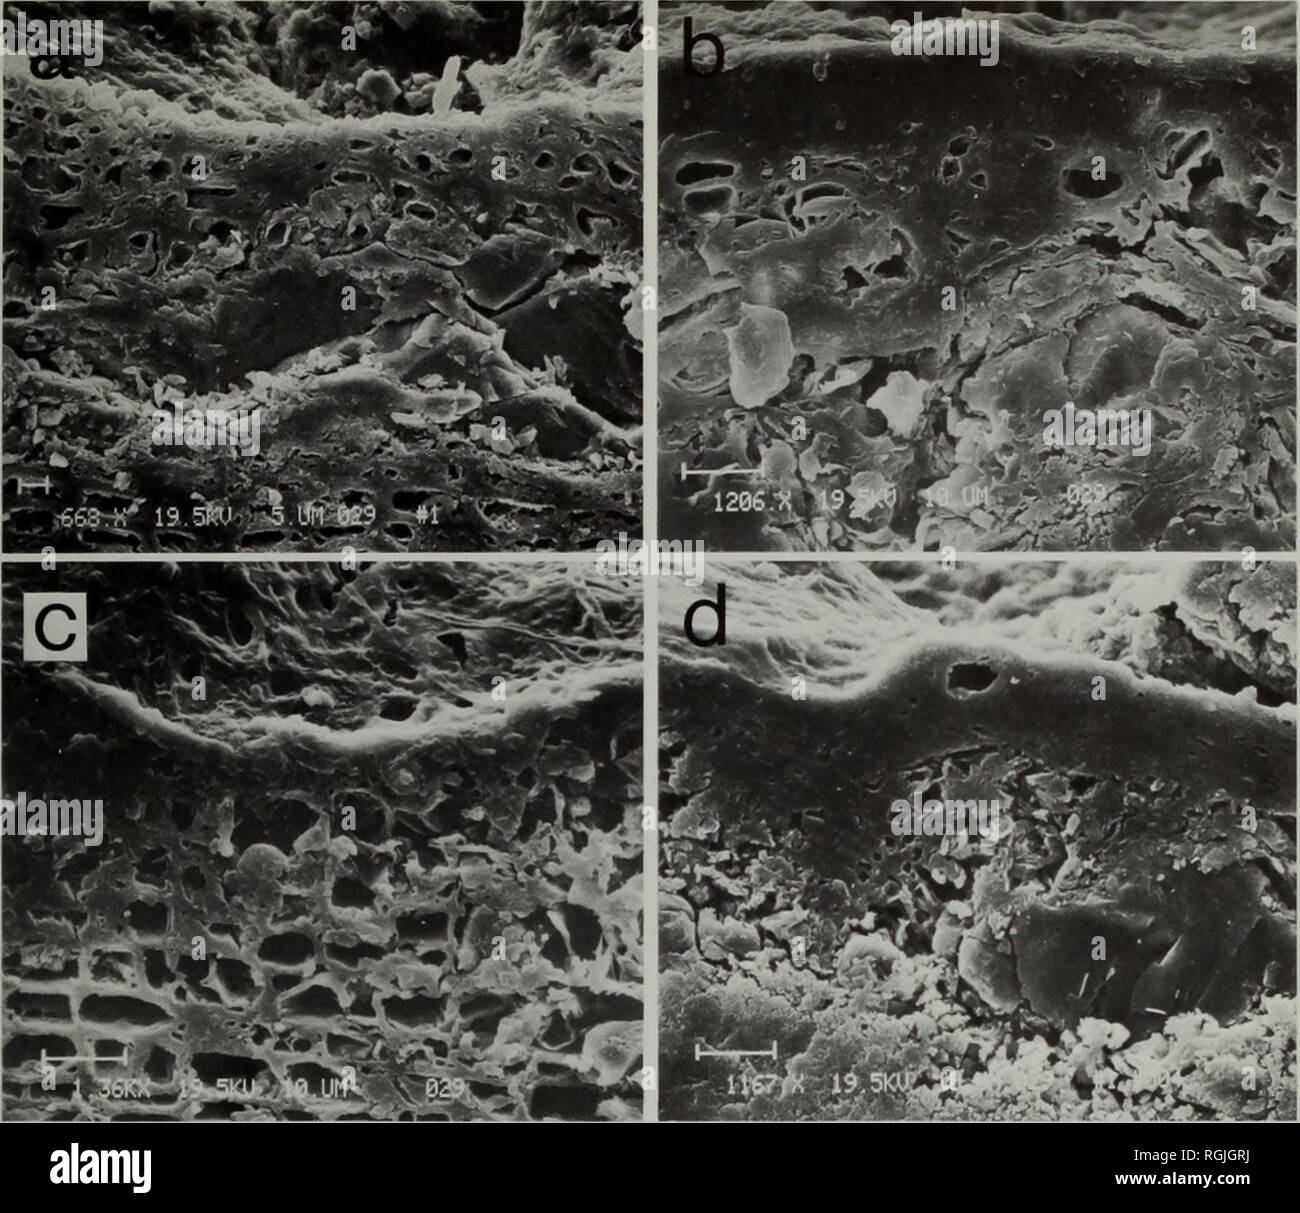 . Bulletin of the British Museum (Natural History) Botany. THELOTREMATACEAE IN SRI LANKA 235. Fig. 3 Cortical structure of the Thelotremataceae viewed with a scanning electron microscope, (a) Loosely organized cellular cortex of Thelotrema imperfectum (Hale 46 338). (b) Dense cellular cortex of Myriotrema album (Hale 4 171). (c) Loosely organized, irregularly pored cortex of Ocellularia chonestoma (Hale 46 344). (d) Dense cellular cortex of O. crassa with large crystal inclusions (Hale 51 210). discovered these peculiar hyphae in some West Indian species (Hale, 1974a: 5, Fig. 3), using the sca Stock Photo